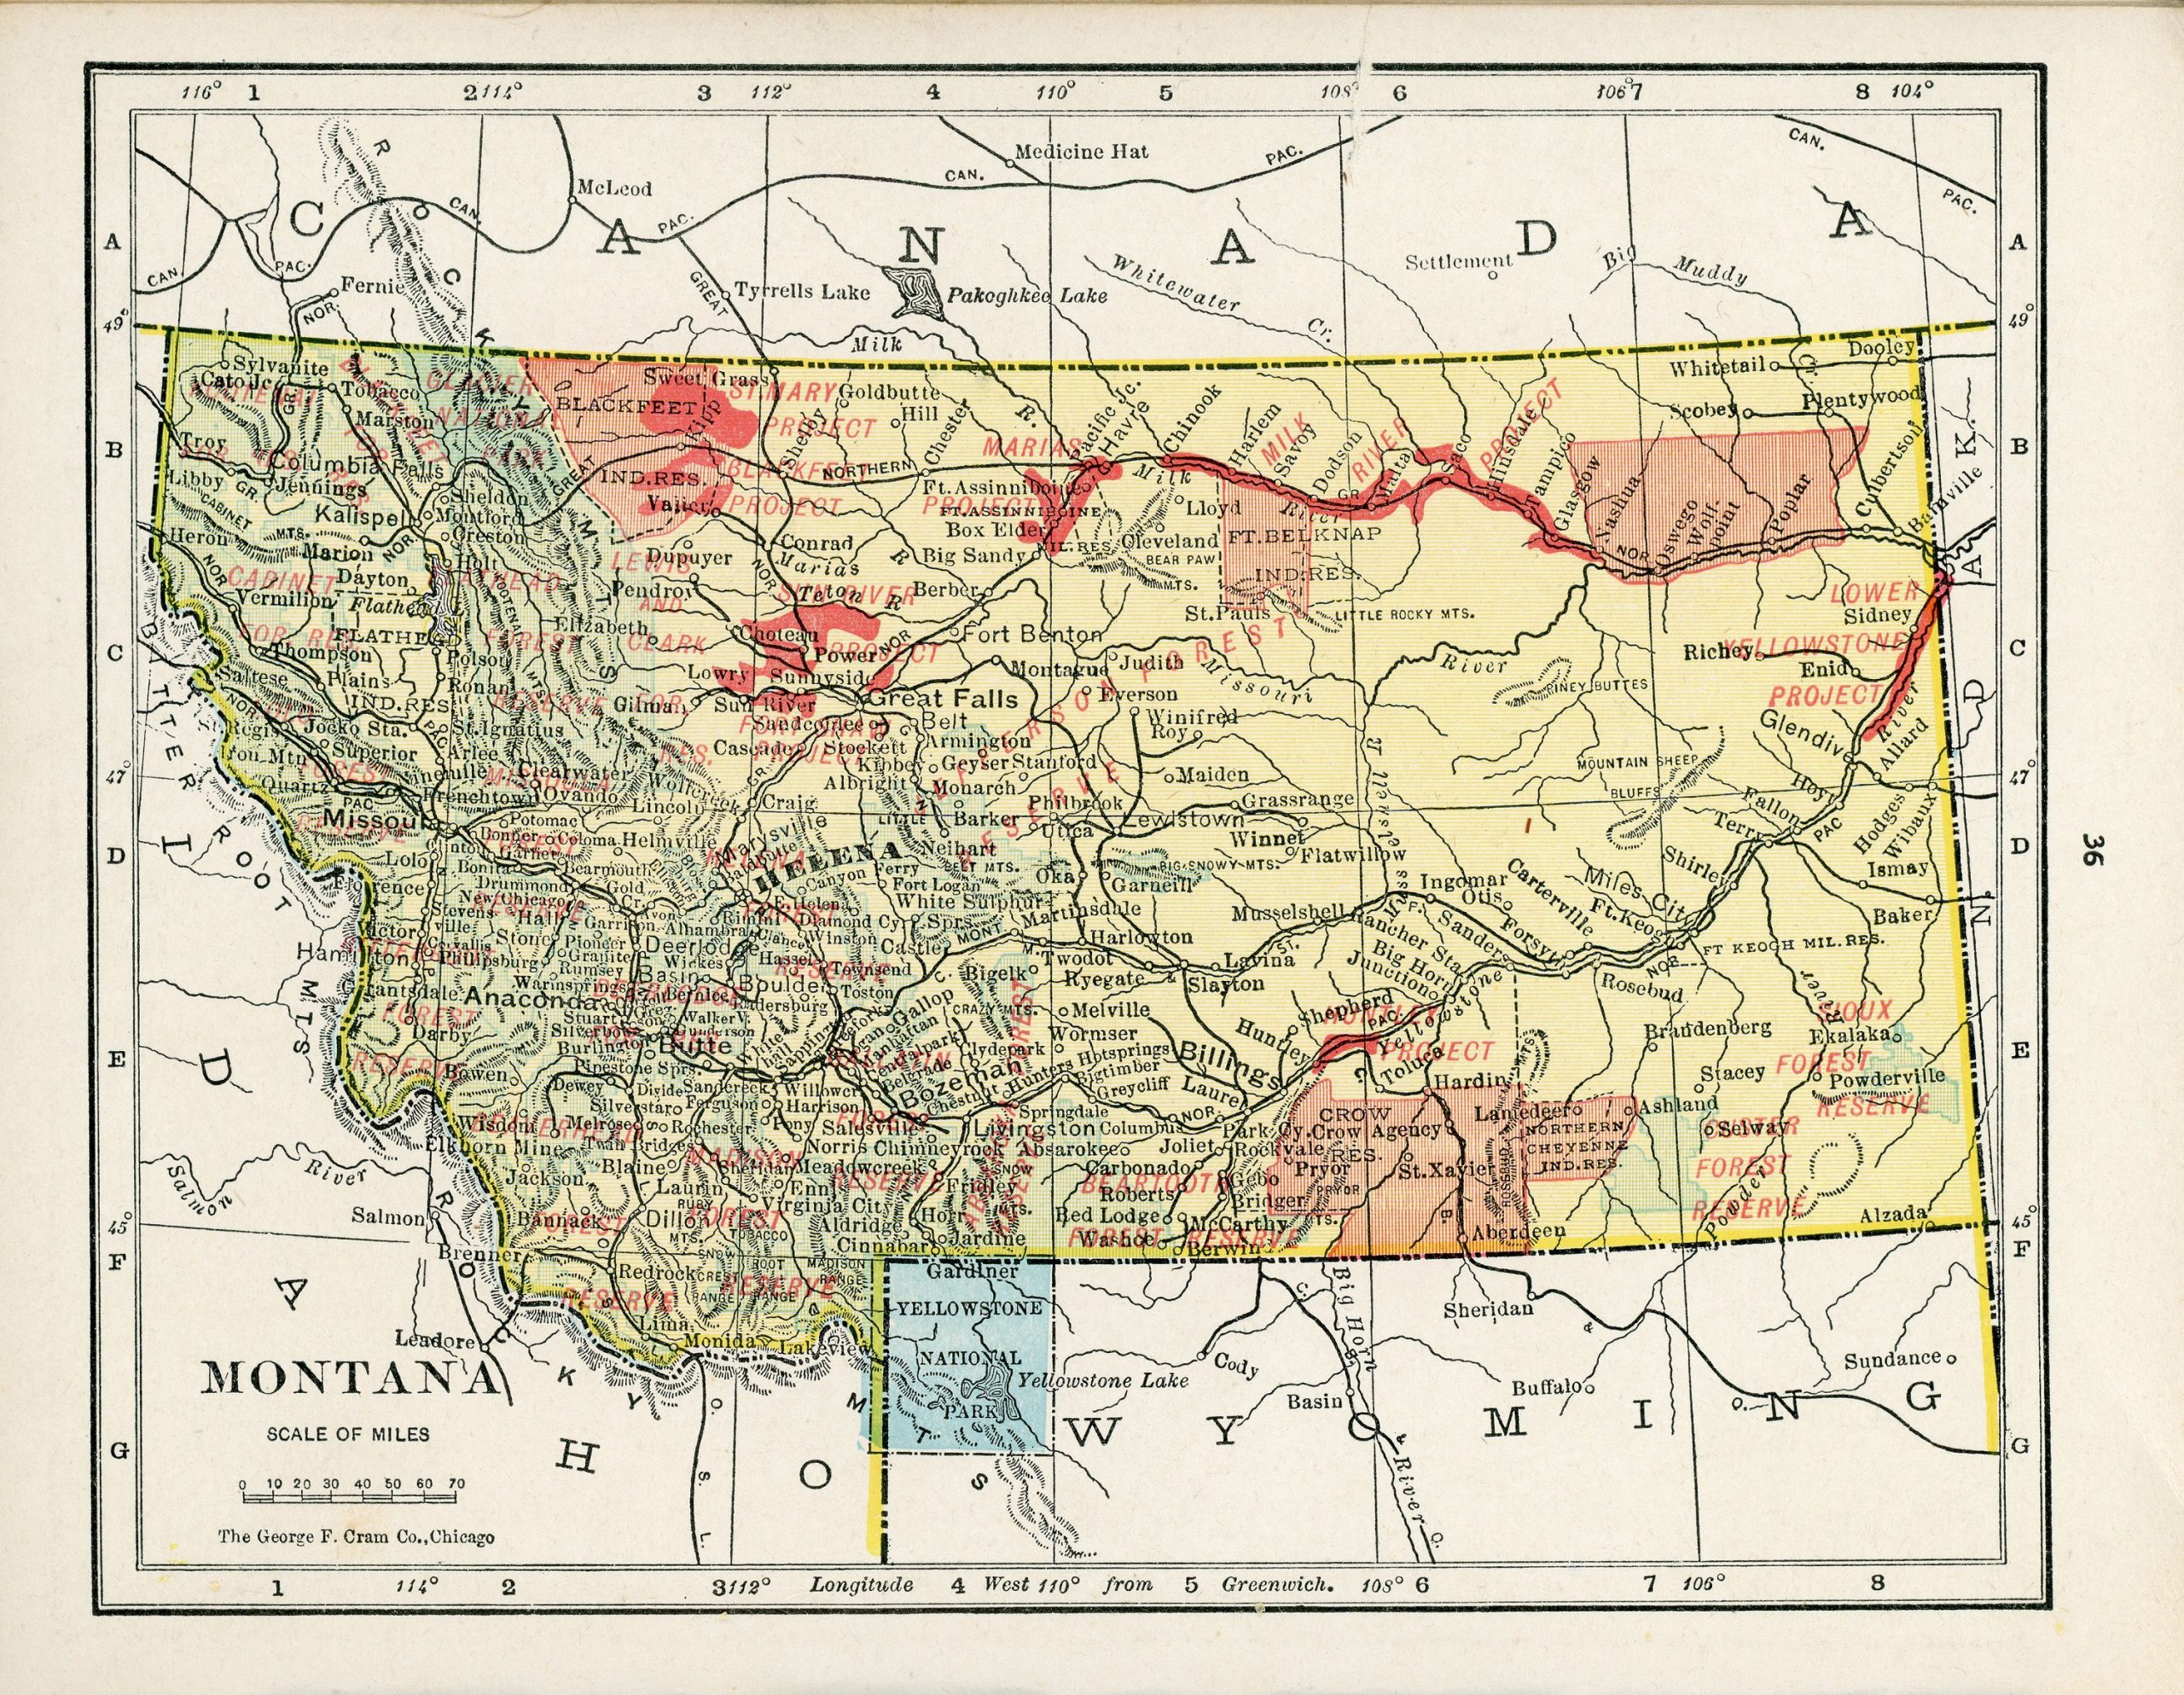 A topographical map of the state of Montana